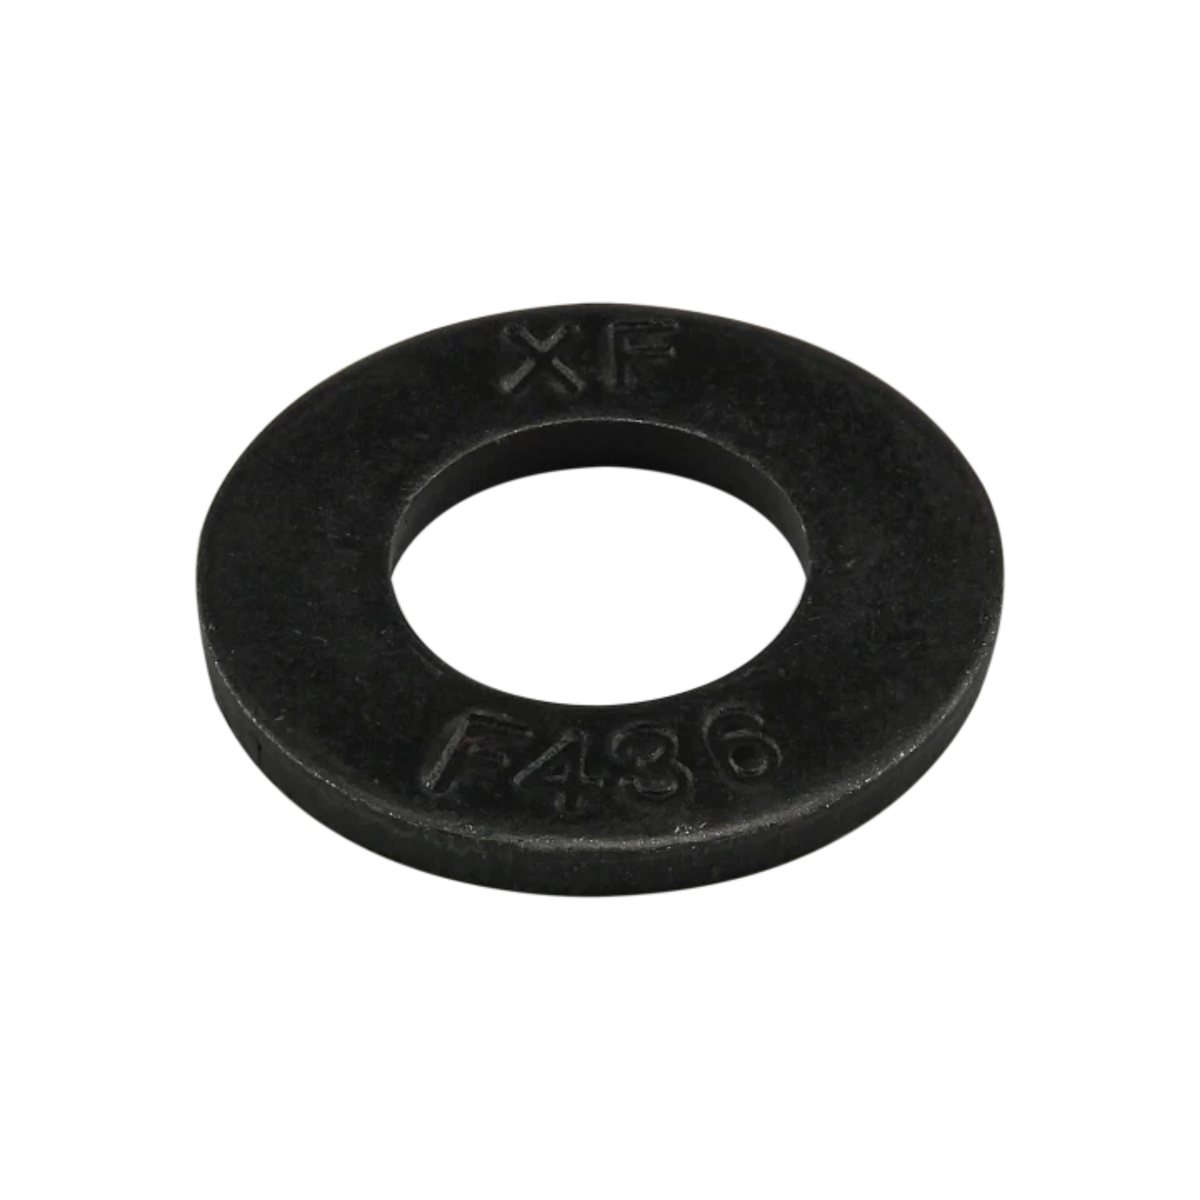 metal round washer with letters XF stamped on the top and F436 stamped on the bottom